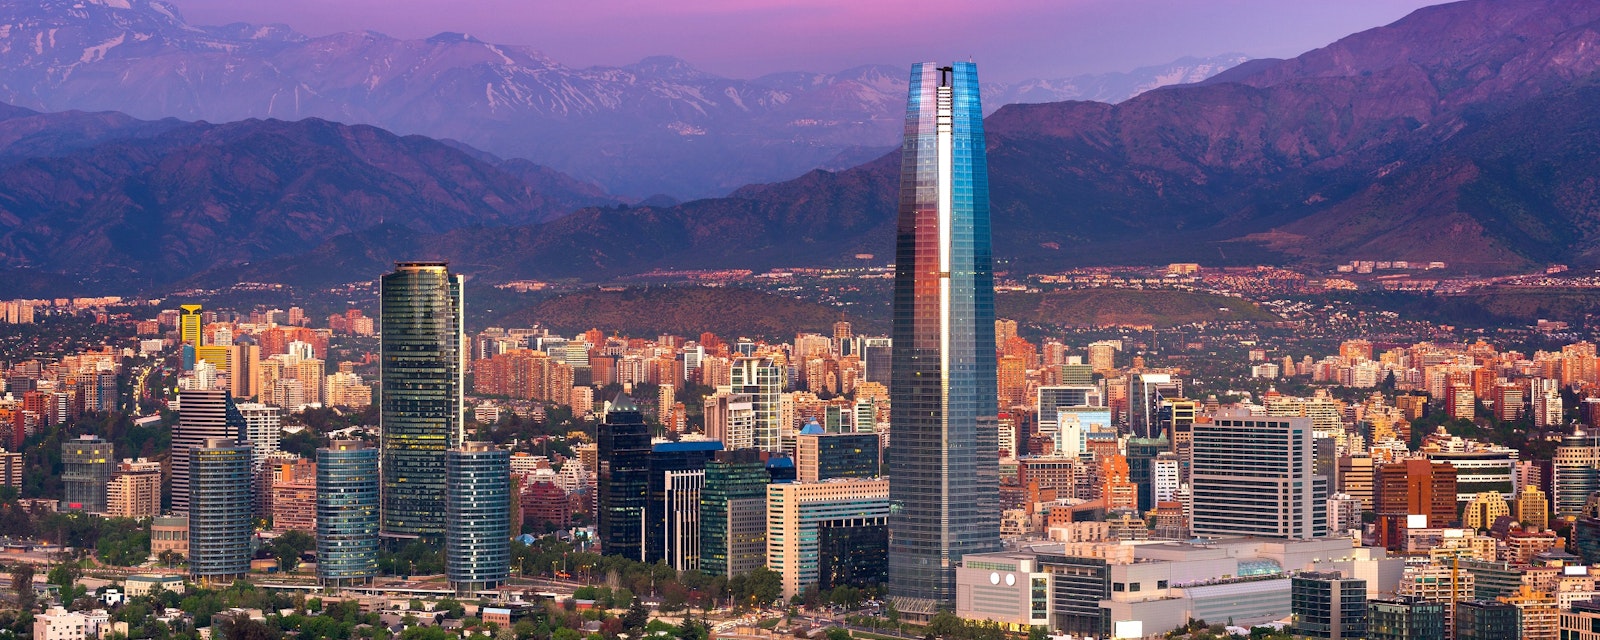 Panoramic,View,Of,Santiago,De,Chile,With,The,Andes,Mountain